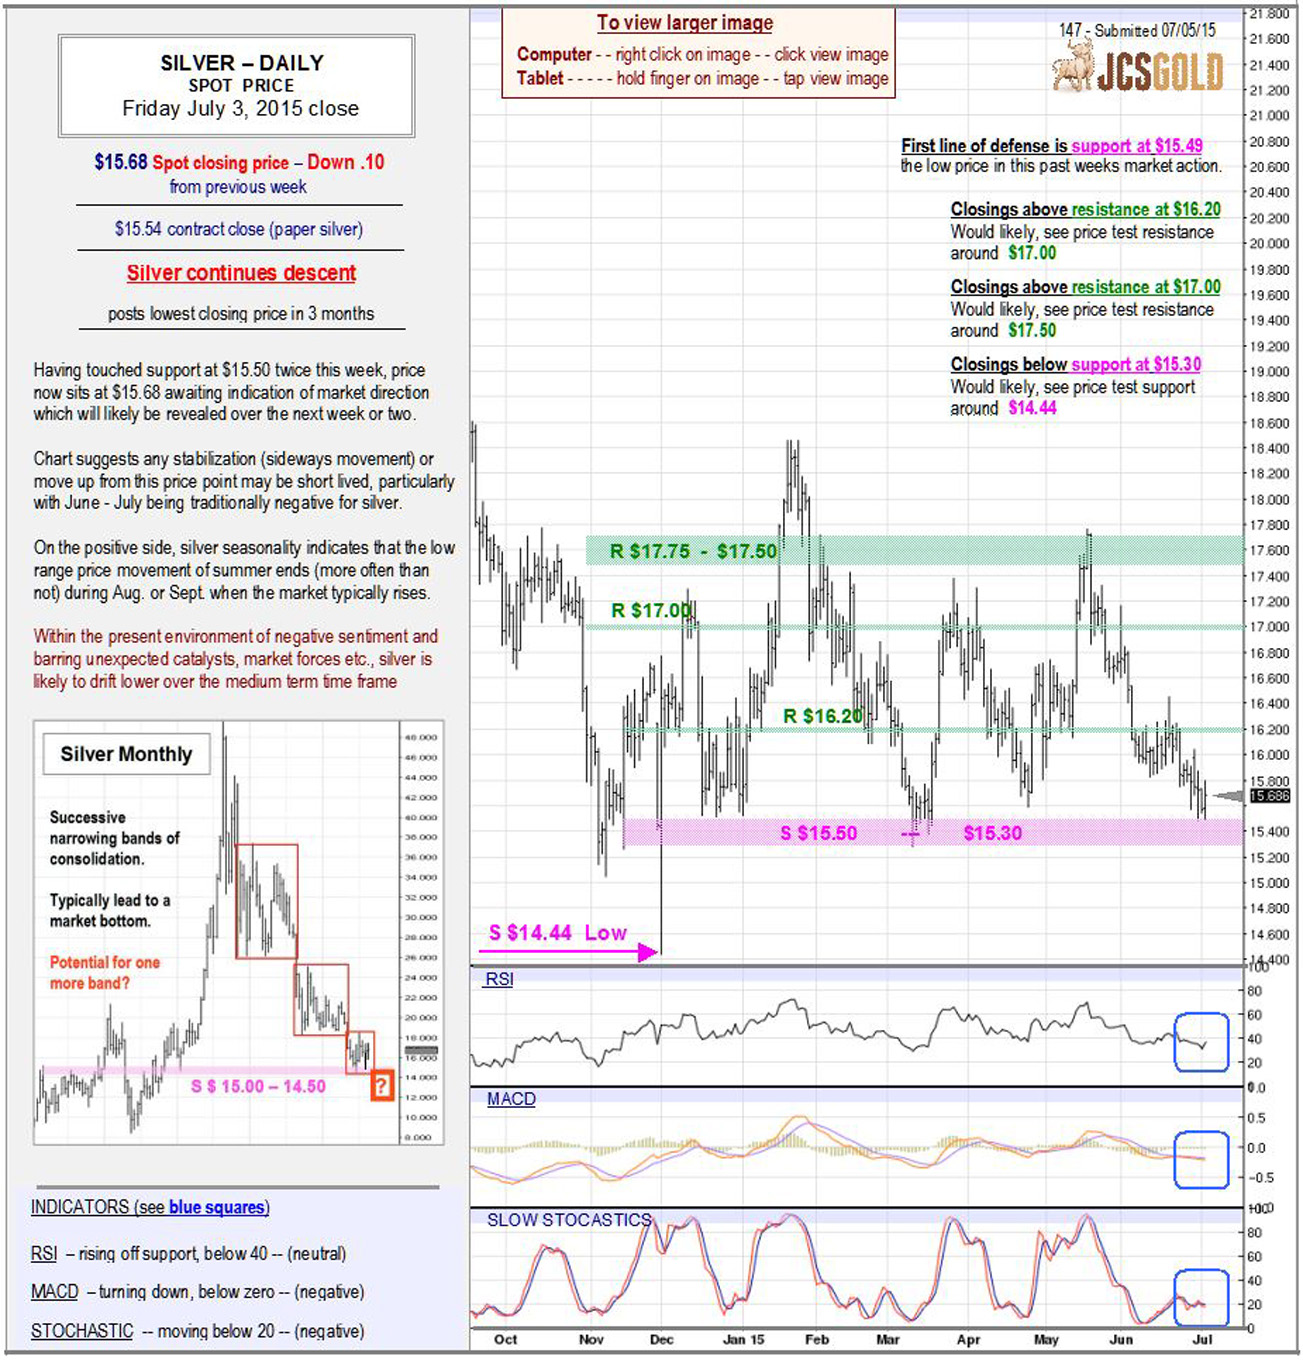 July 3, 2015 chart & commentary